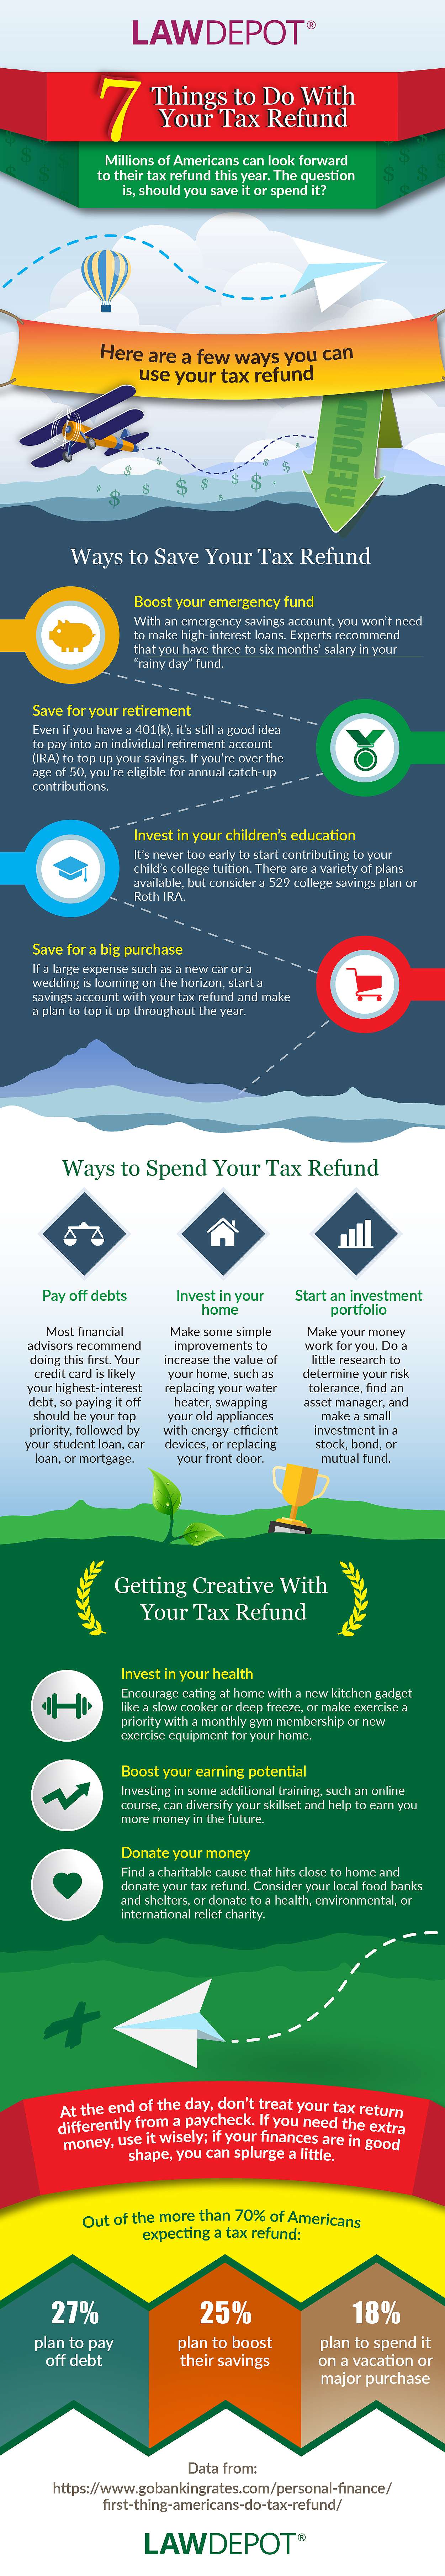 7-things-to-do-with-your-tax-refund-infographic-lawdepot-blog